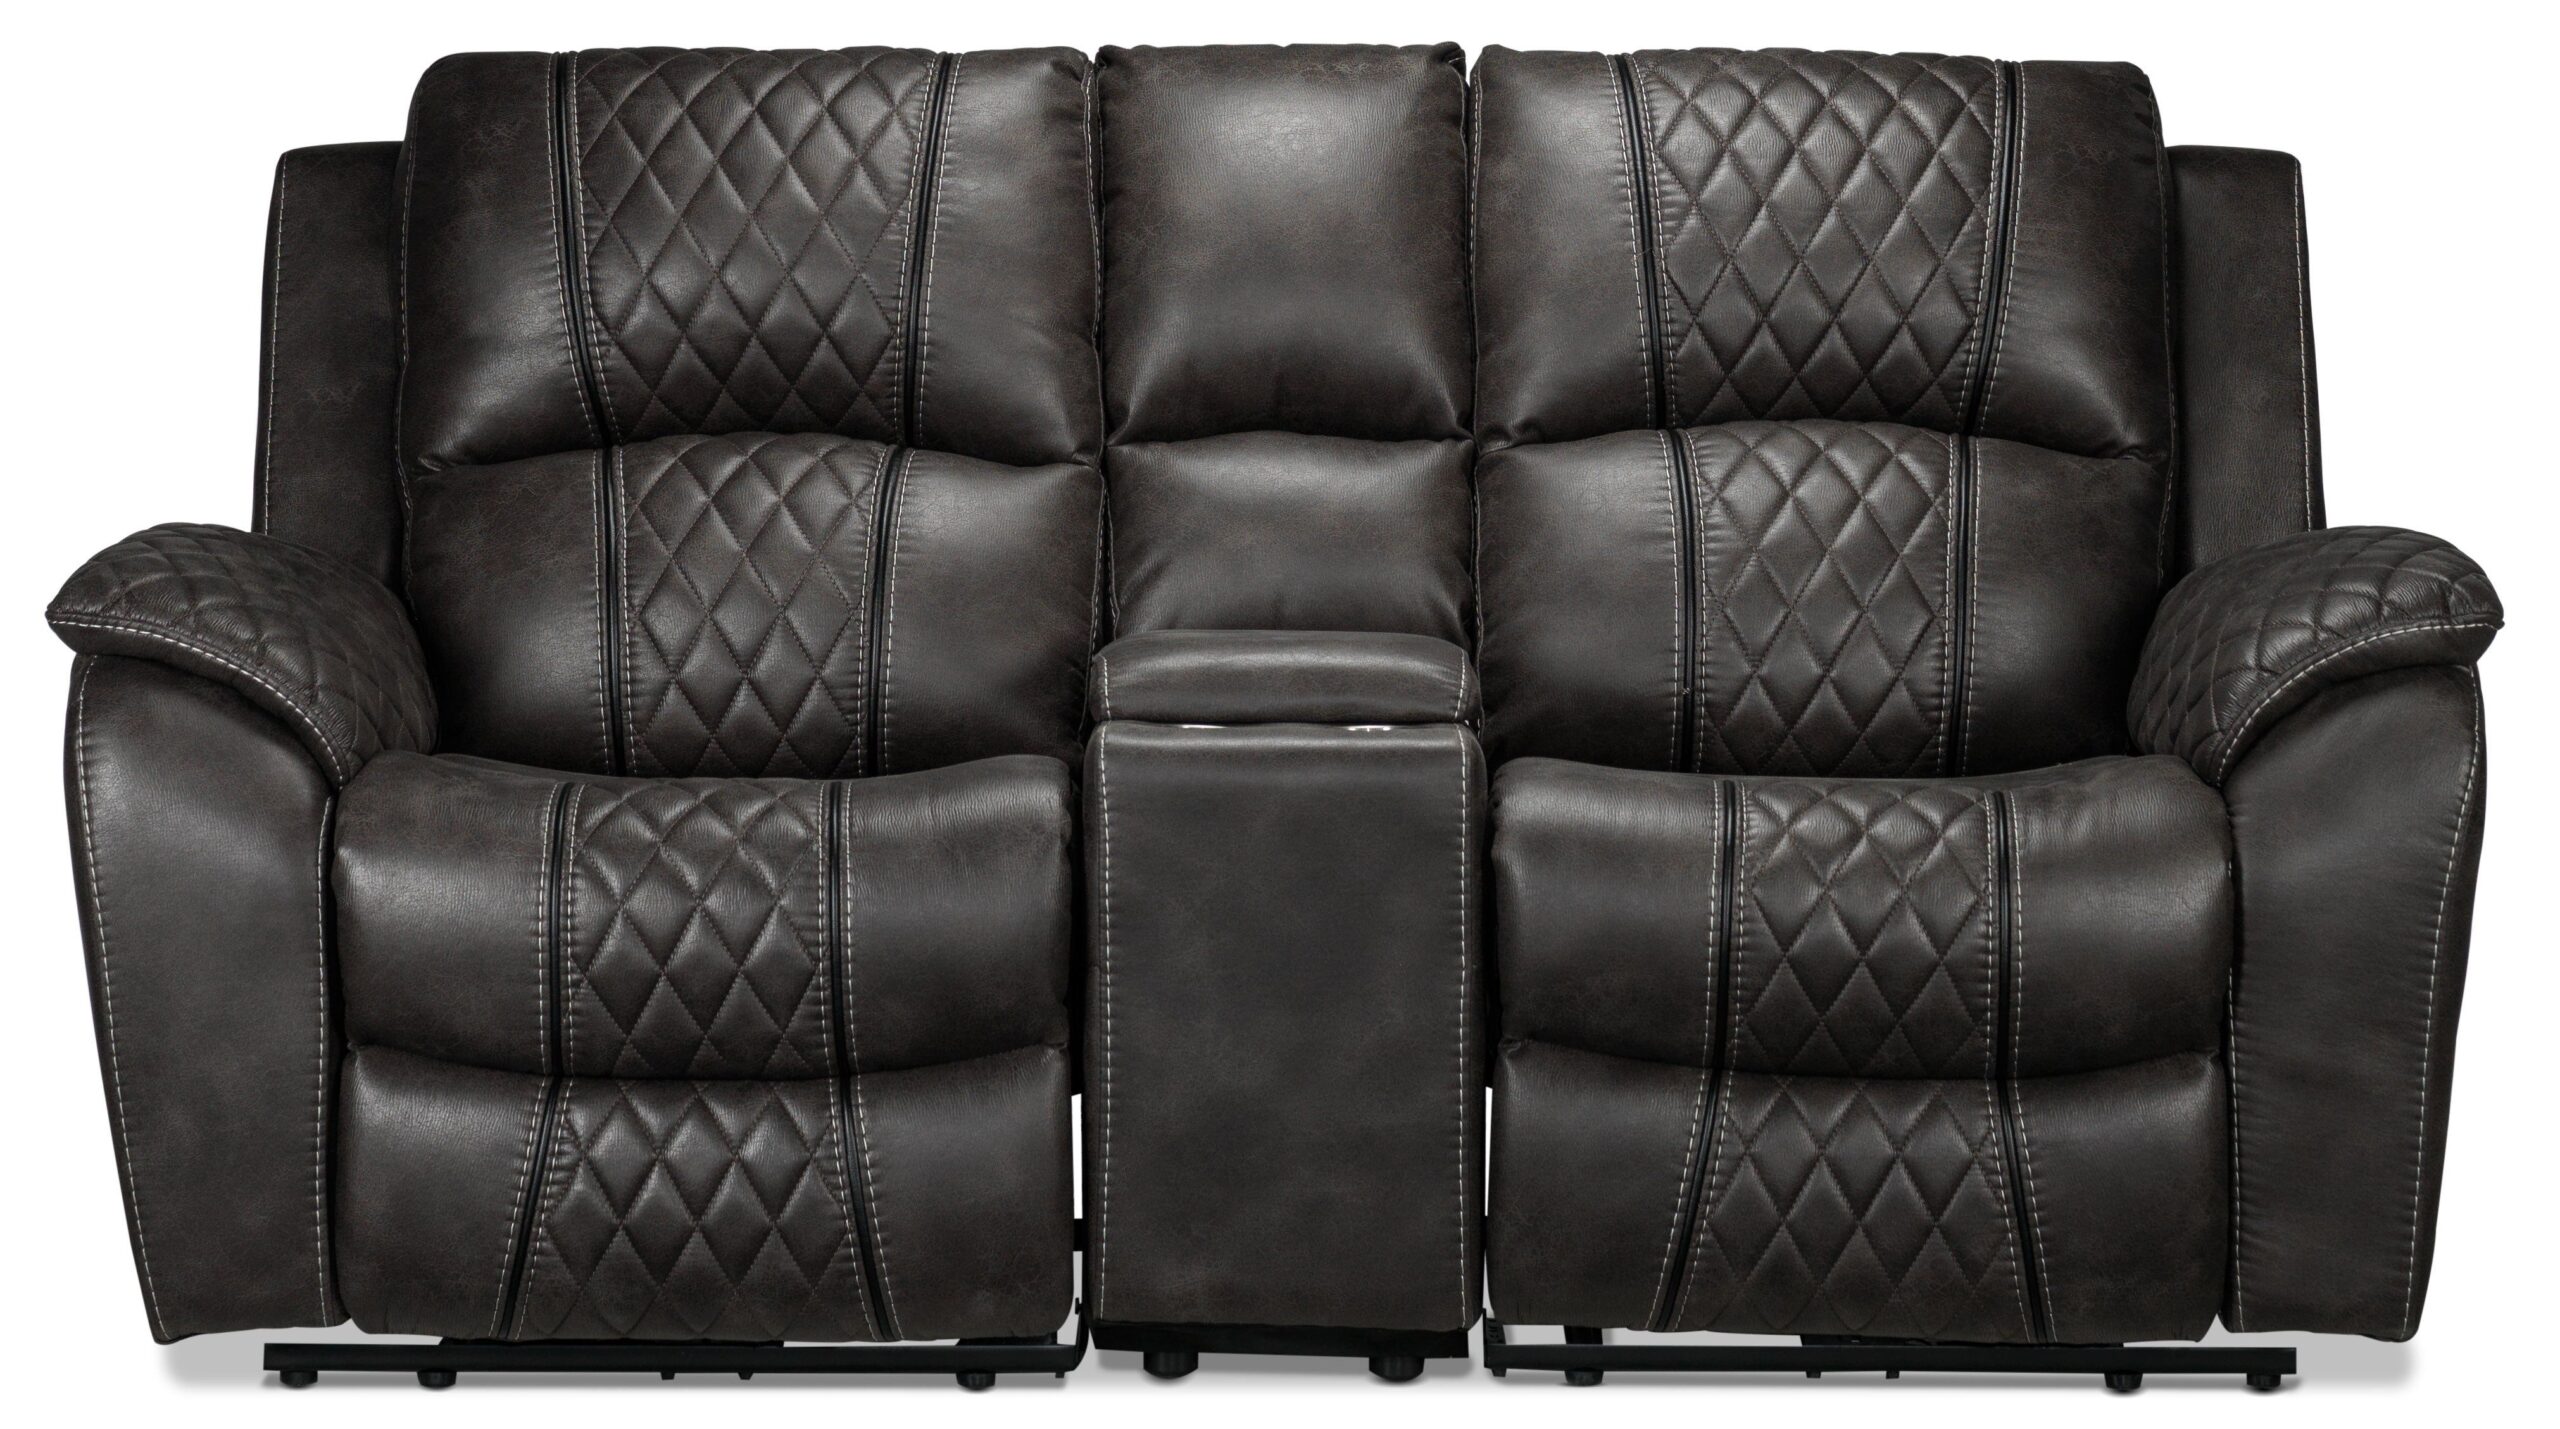 Loveseat With Recliners You’ll Enjoy